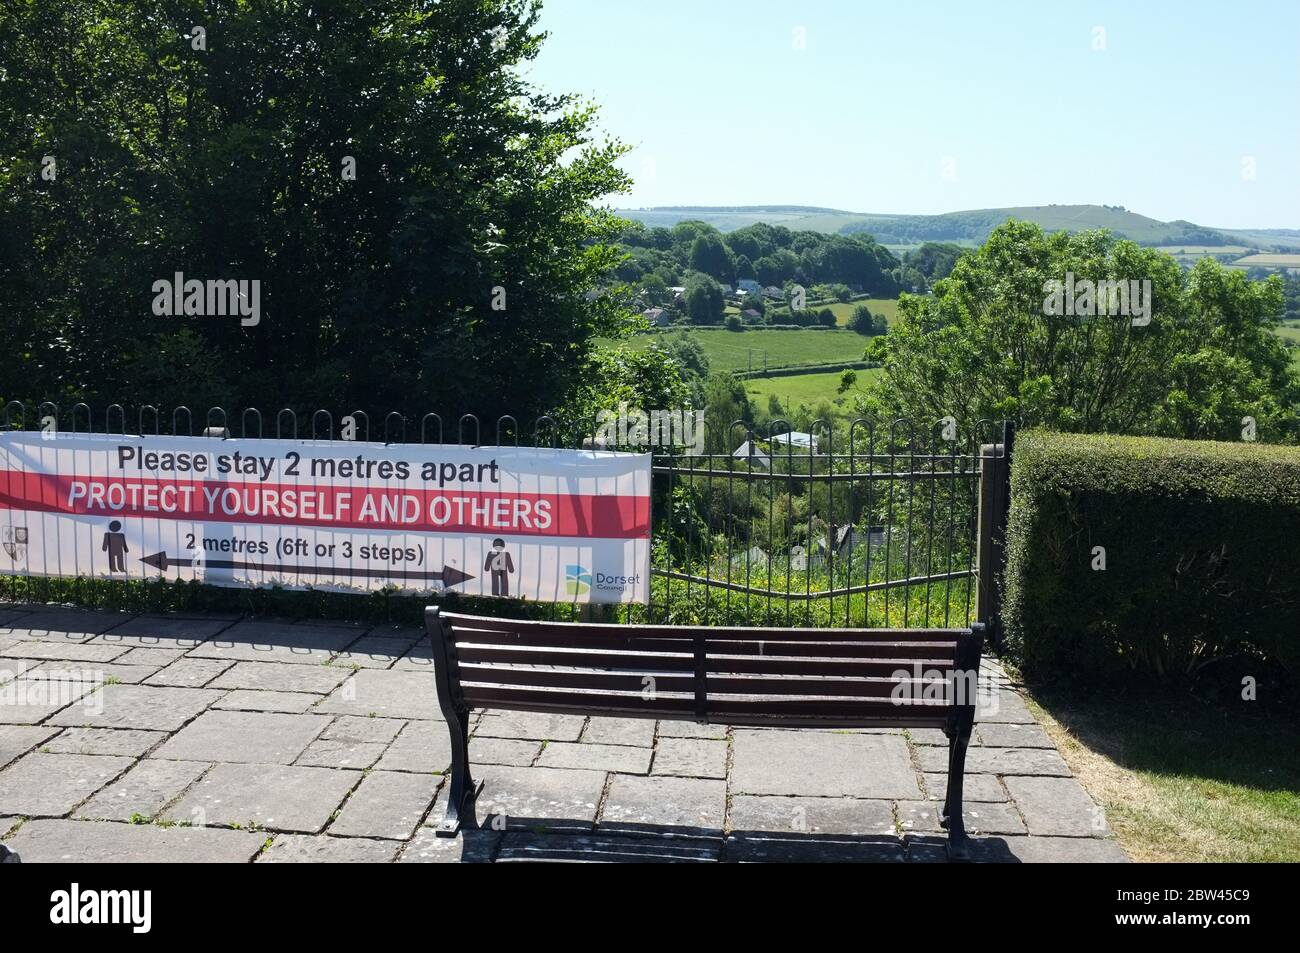 Coronavirus banner reminding people to stay apart pictured in Shaftesbury Dorset - a small rural market town overlooking the countryside. May 2020. Stock Photo